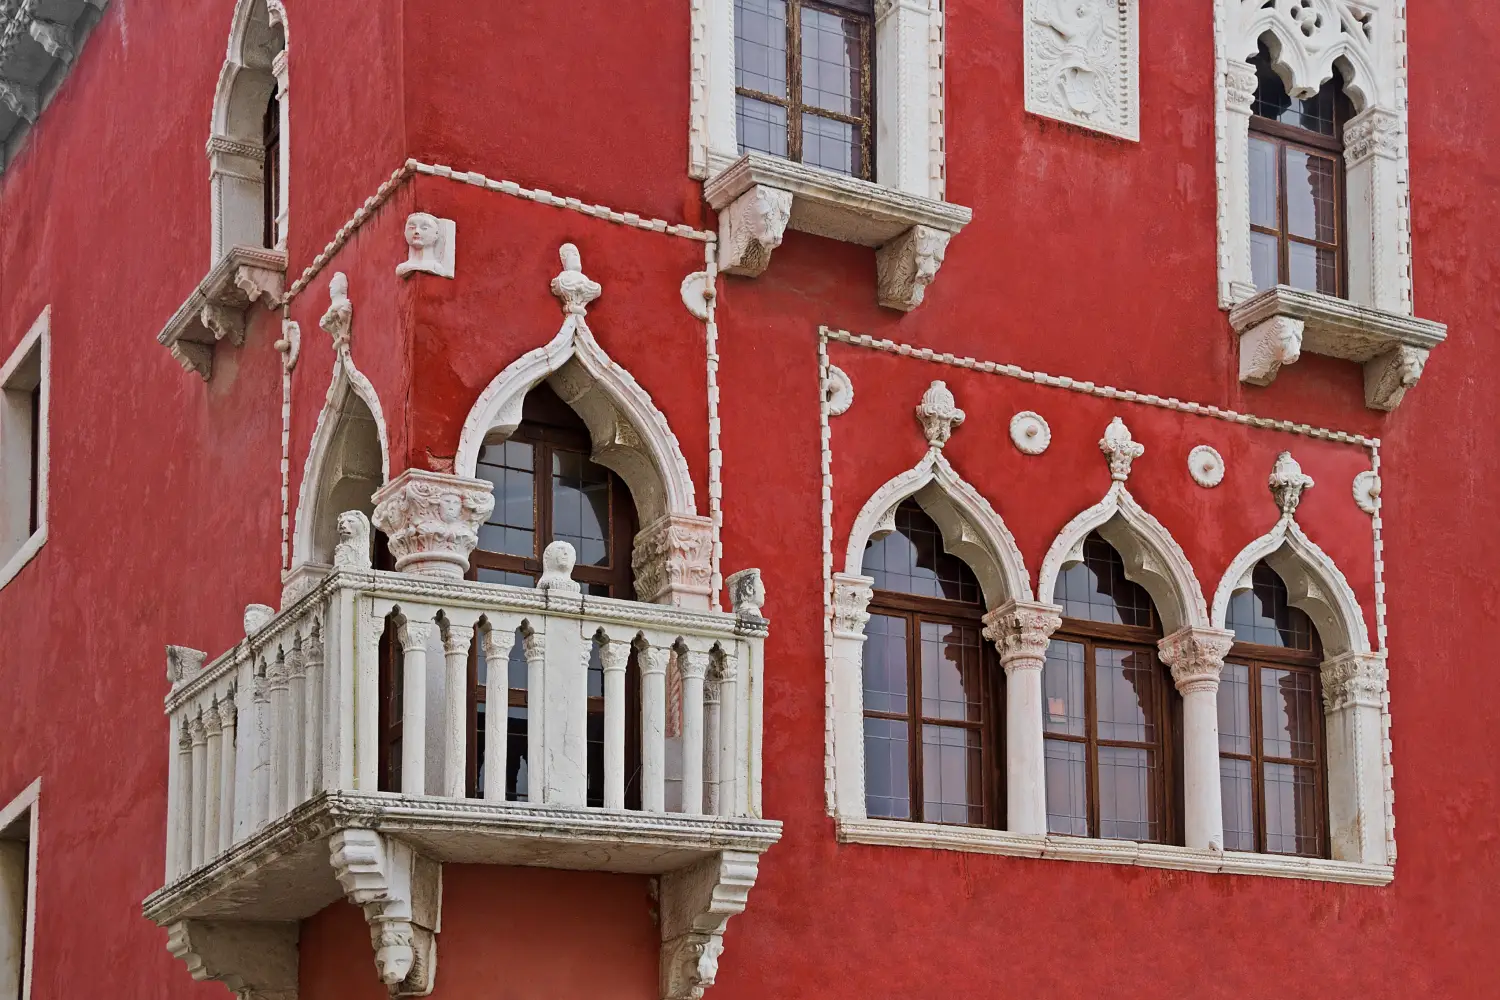 Ferry to Pirano - House fragment in the Venetian style with characteristic windows and a balcony, Piran, Slovenia.